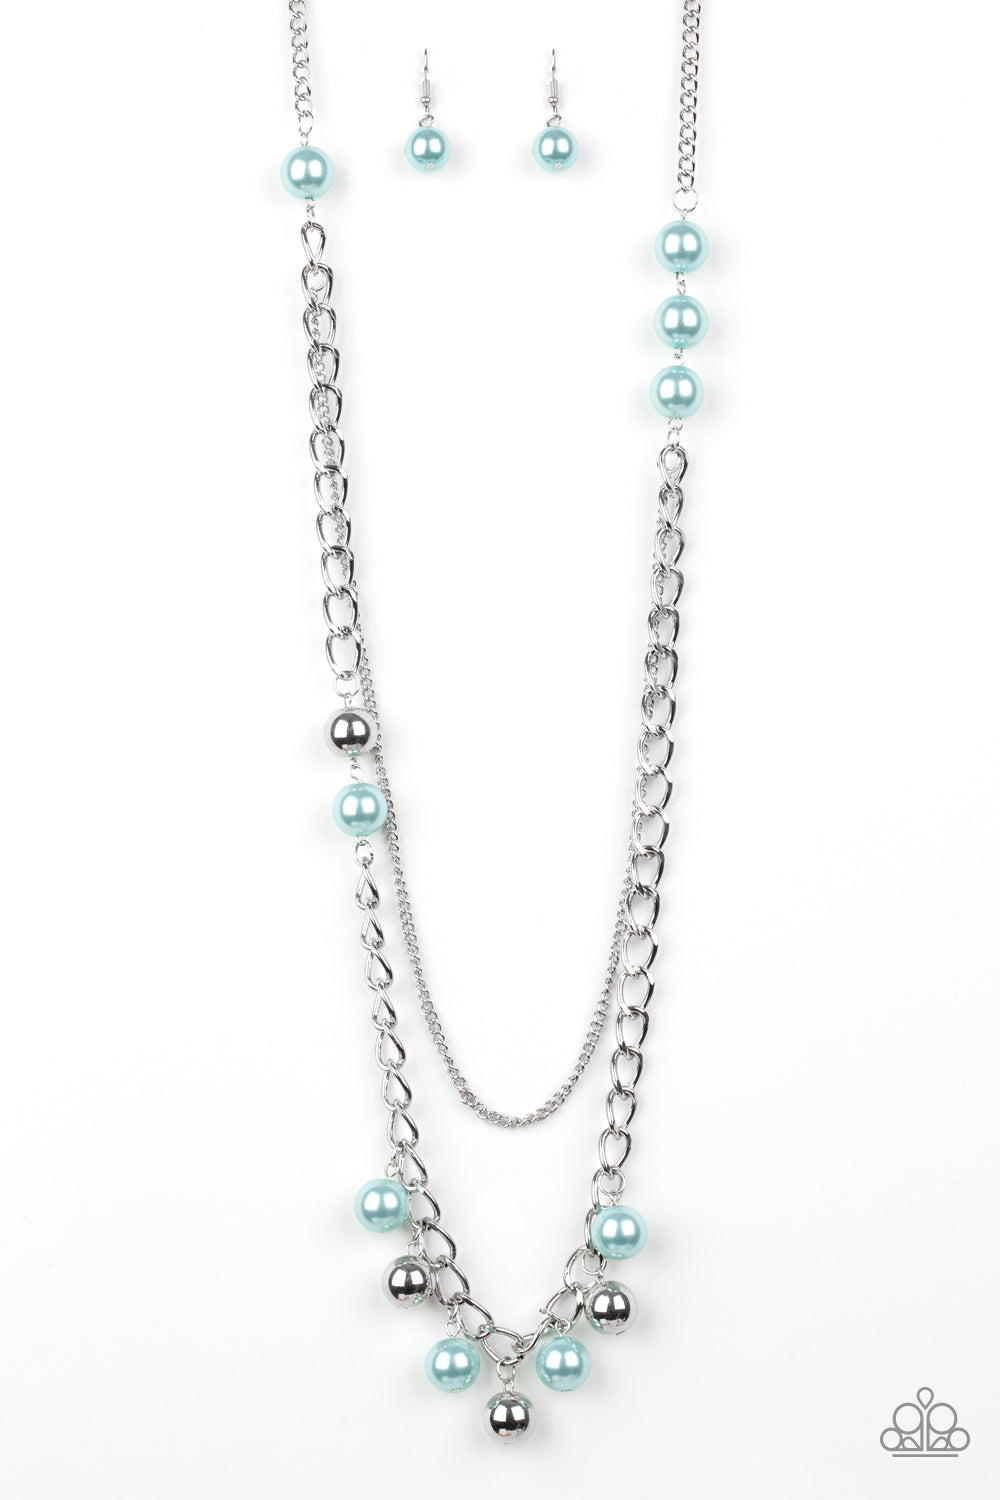 Paparazzi Accessories - Modern Musical - Blue & Silver Necklace